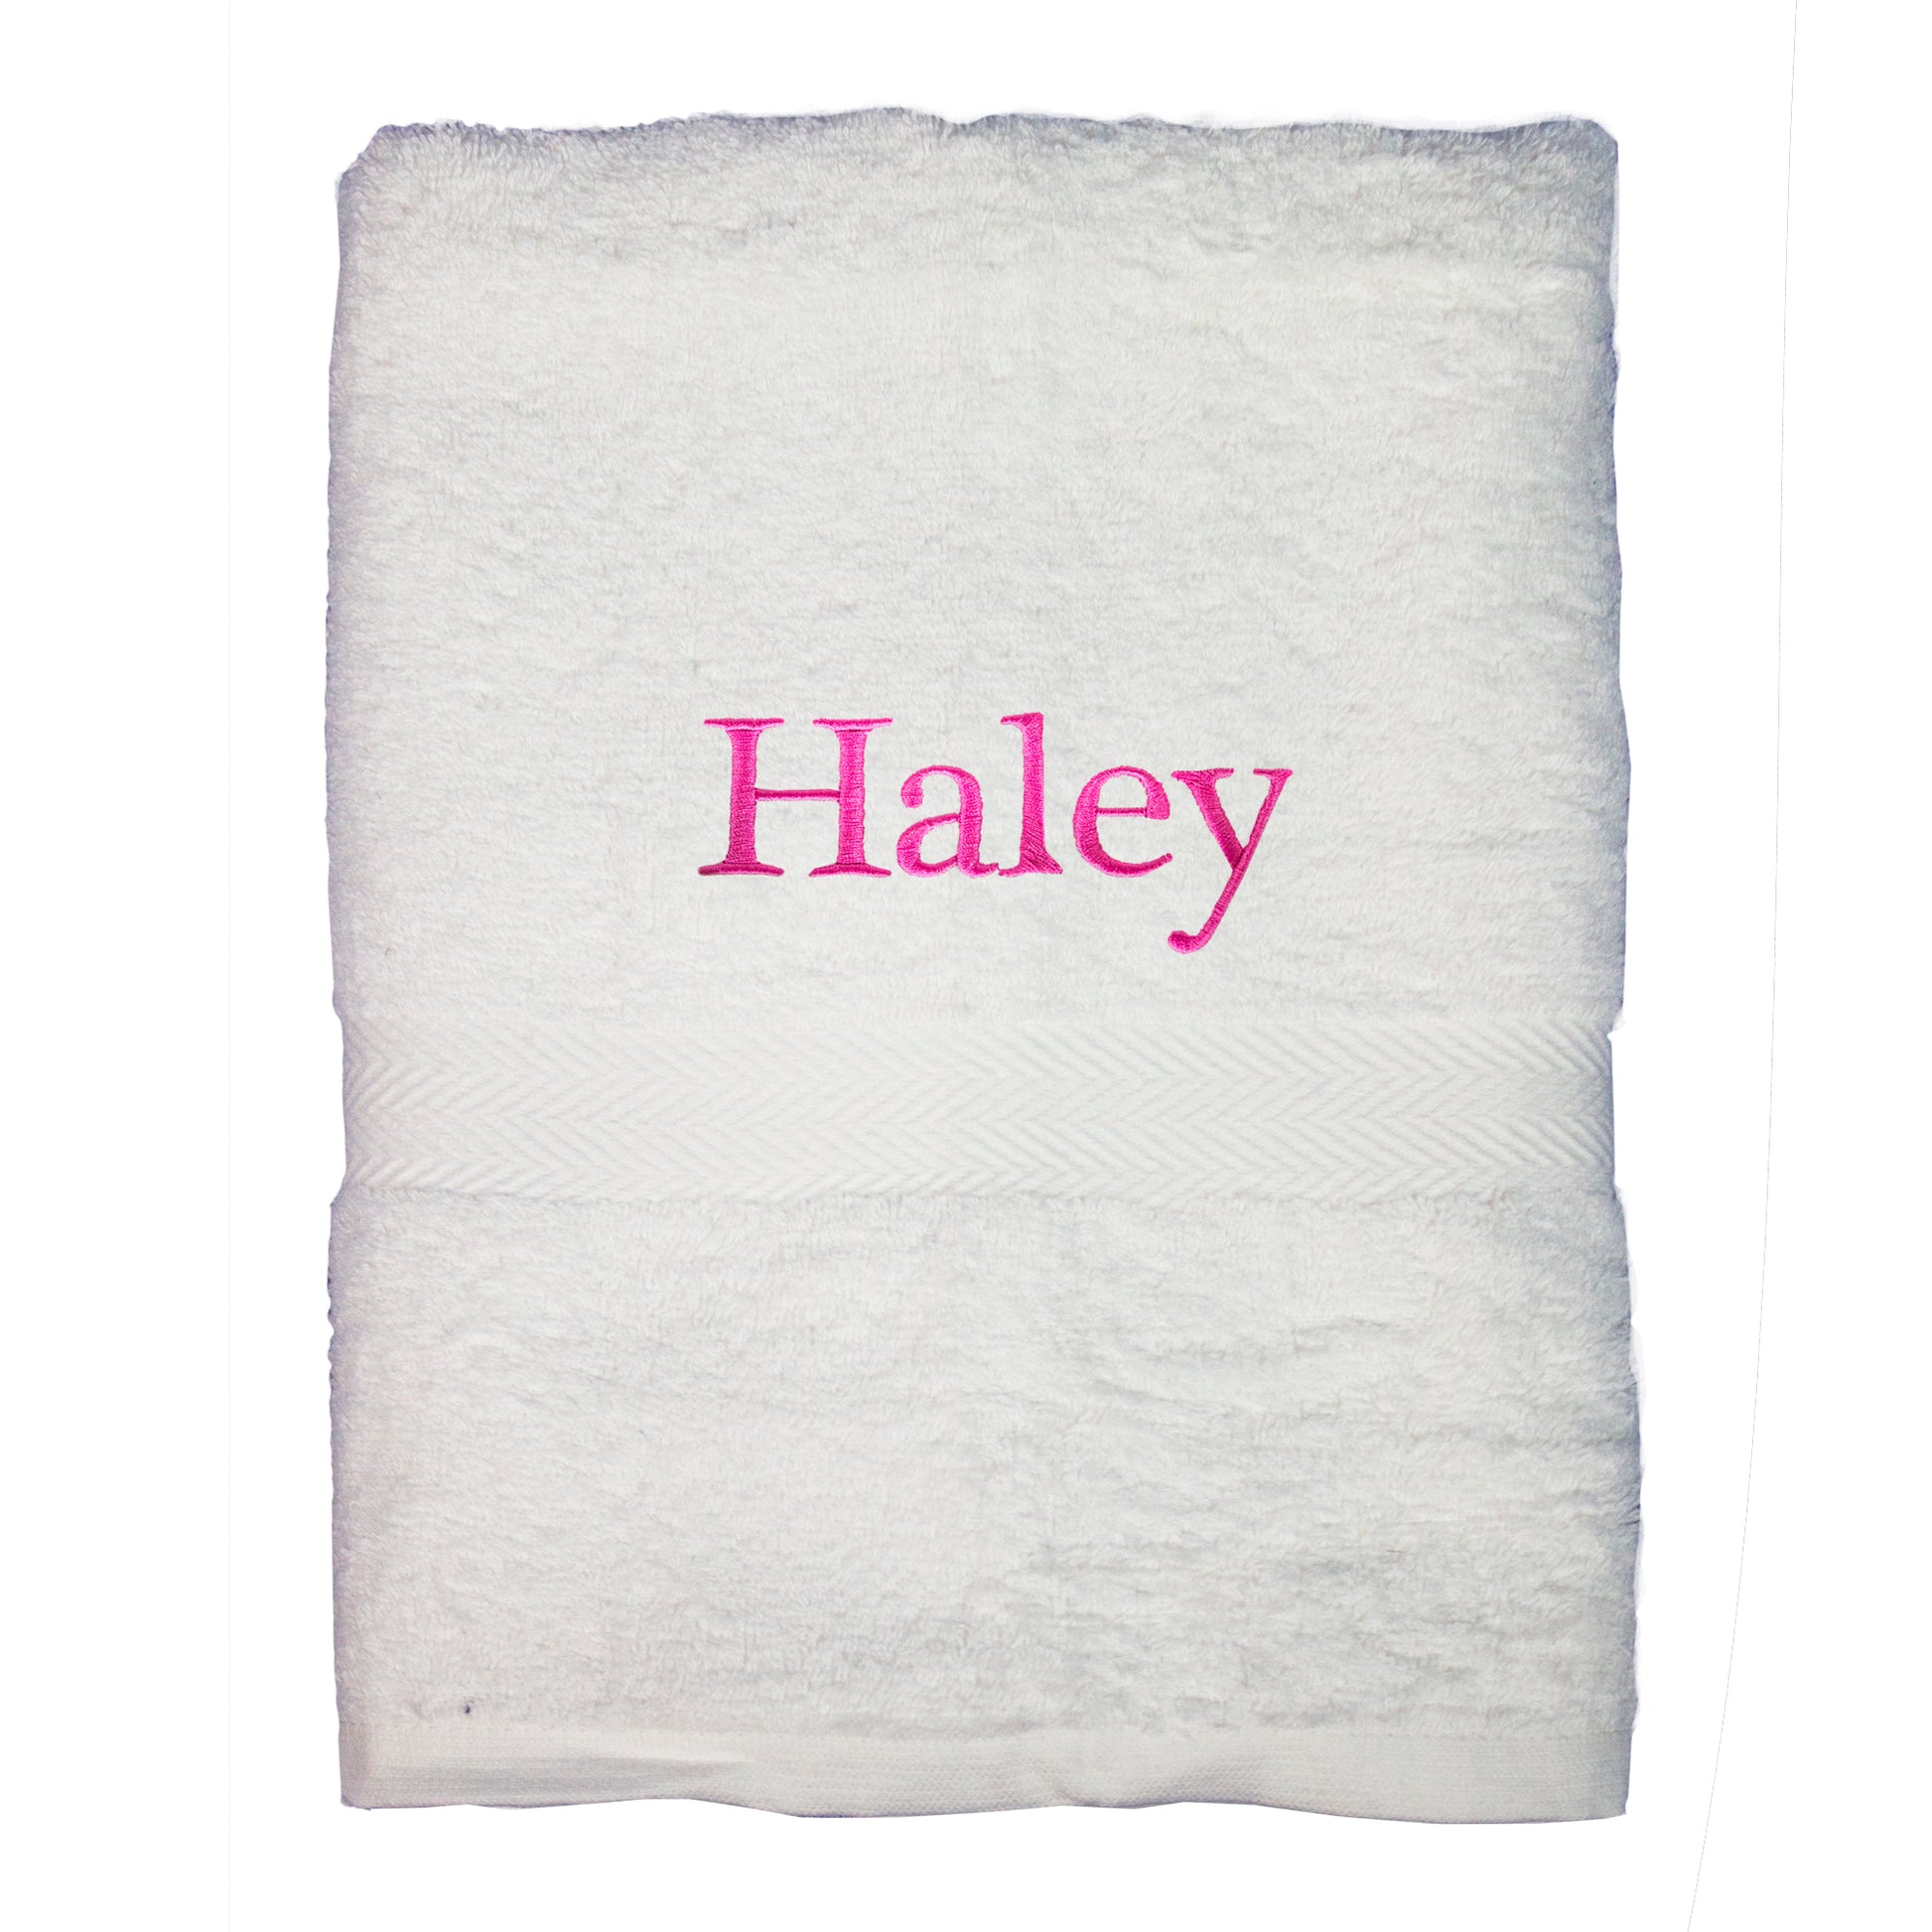 Personalized White Bath Towel Monogrammed 